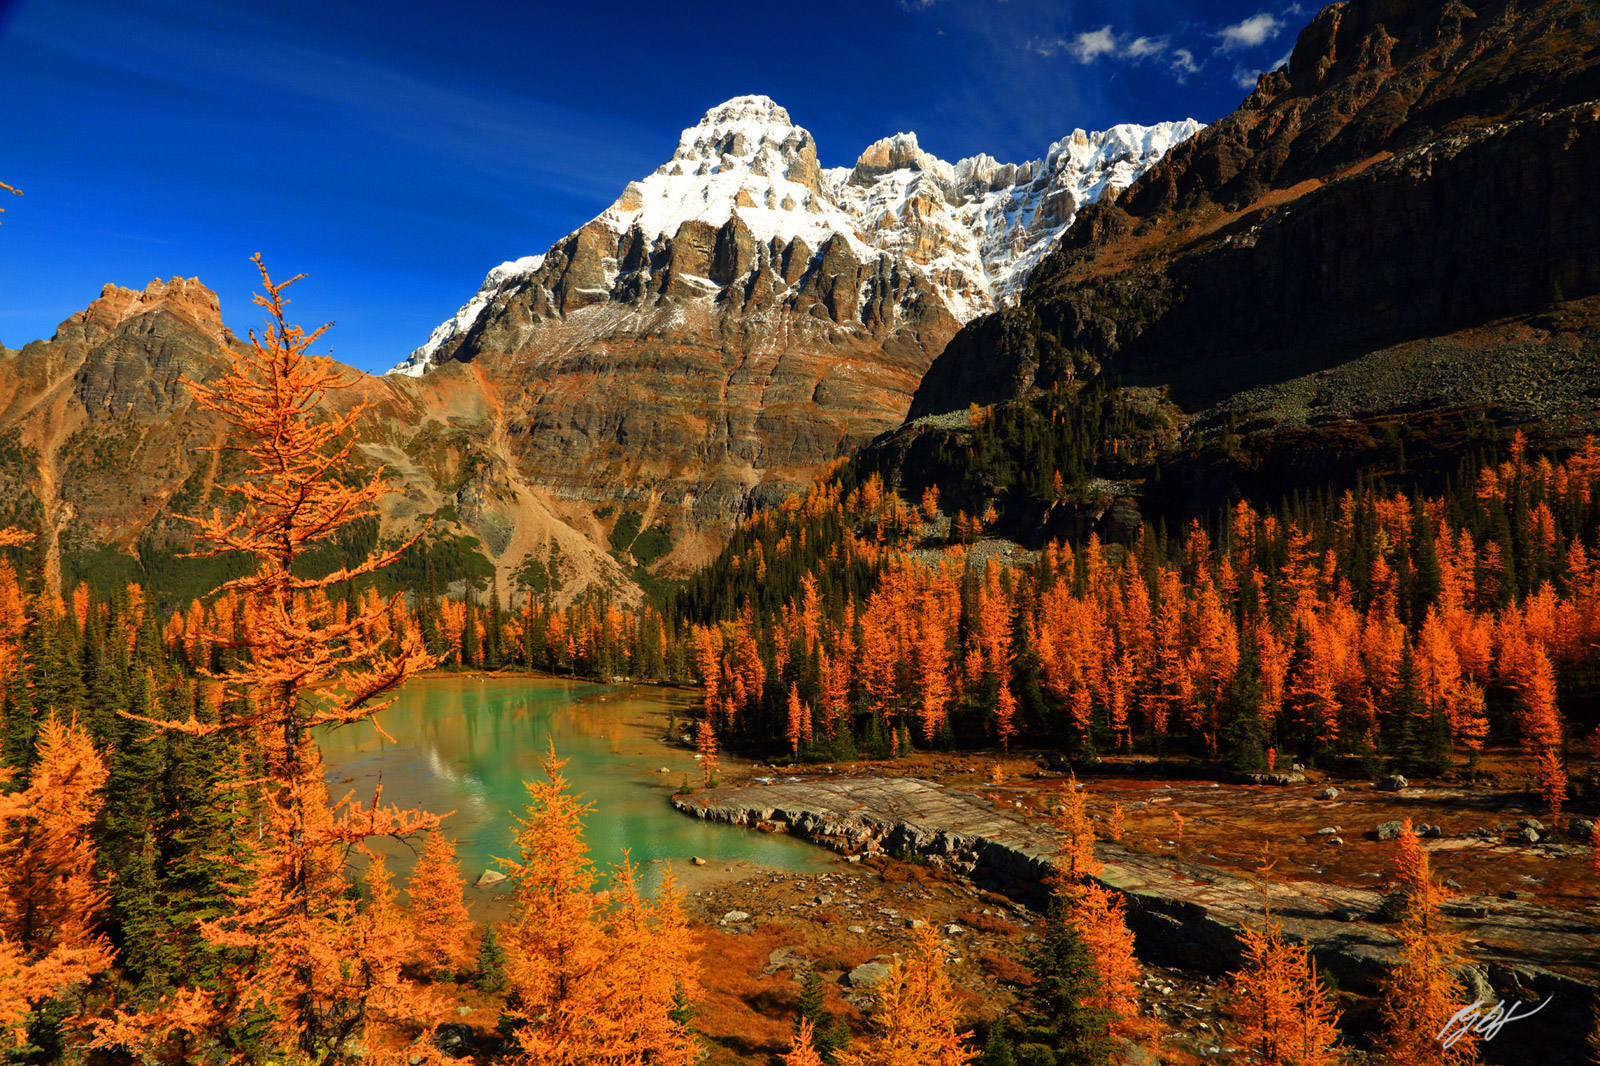 Golden Larch and Mt Huber from Opabin Plateau, in the Lake O'Hara Region of Yoho National Park in Canada